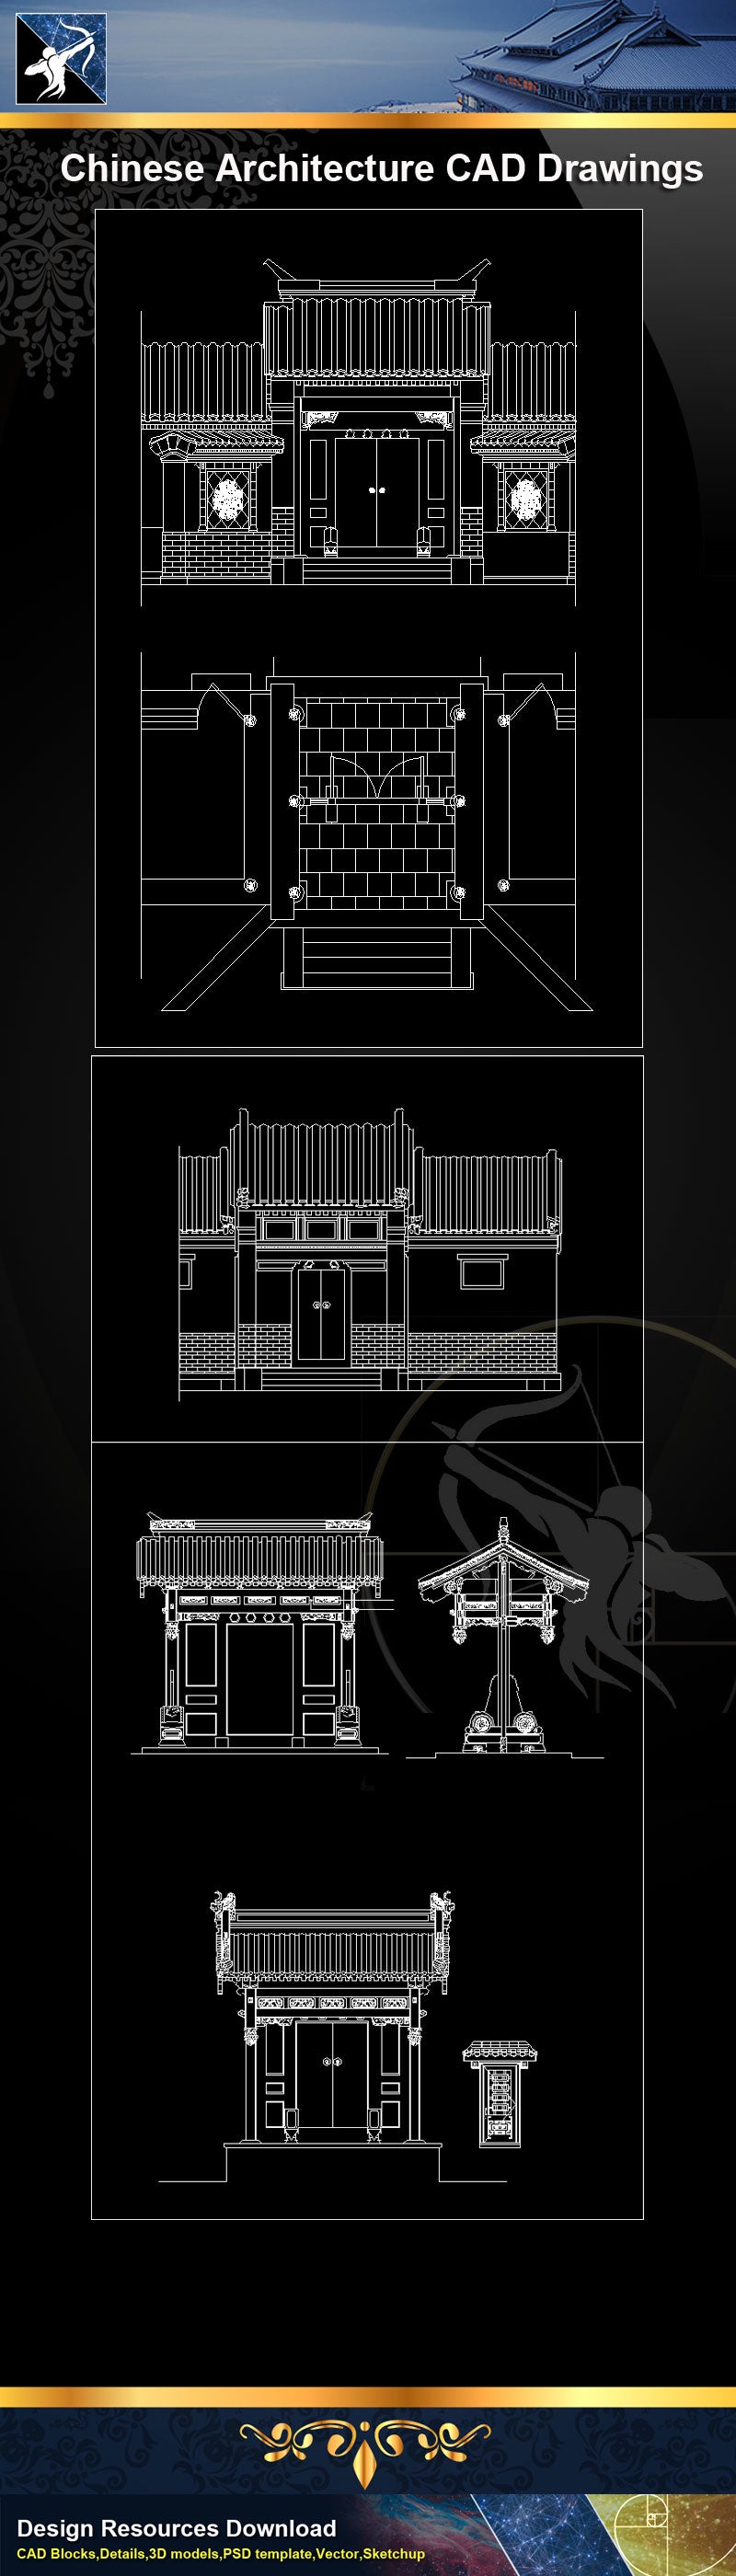 Chinese Architecture Drawing|Chinese Temple|Chinese Tower|Chinese building elevation|Chinese Traditional Architecture CAD Drawings